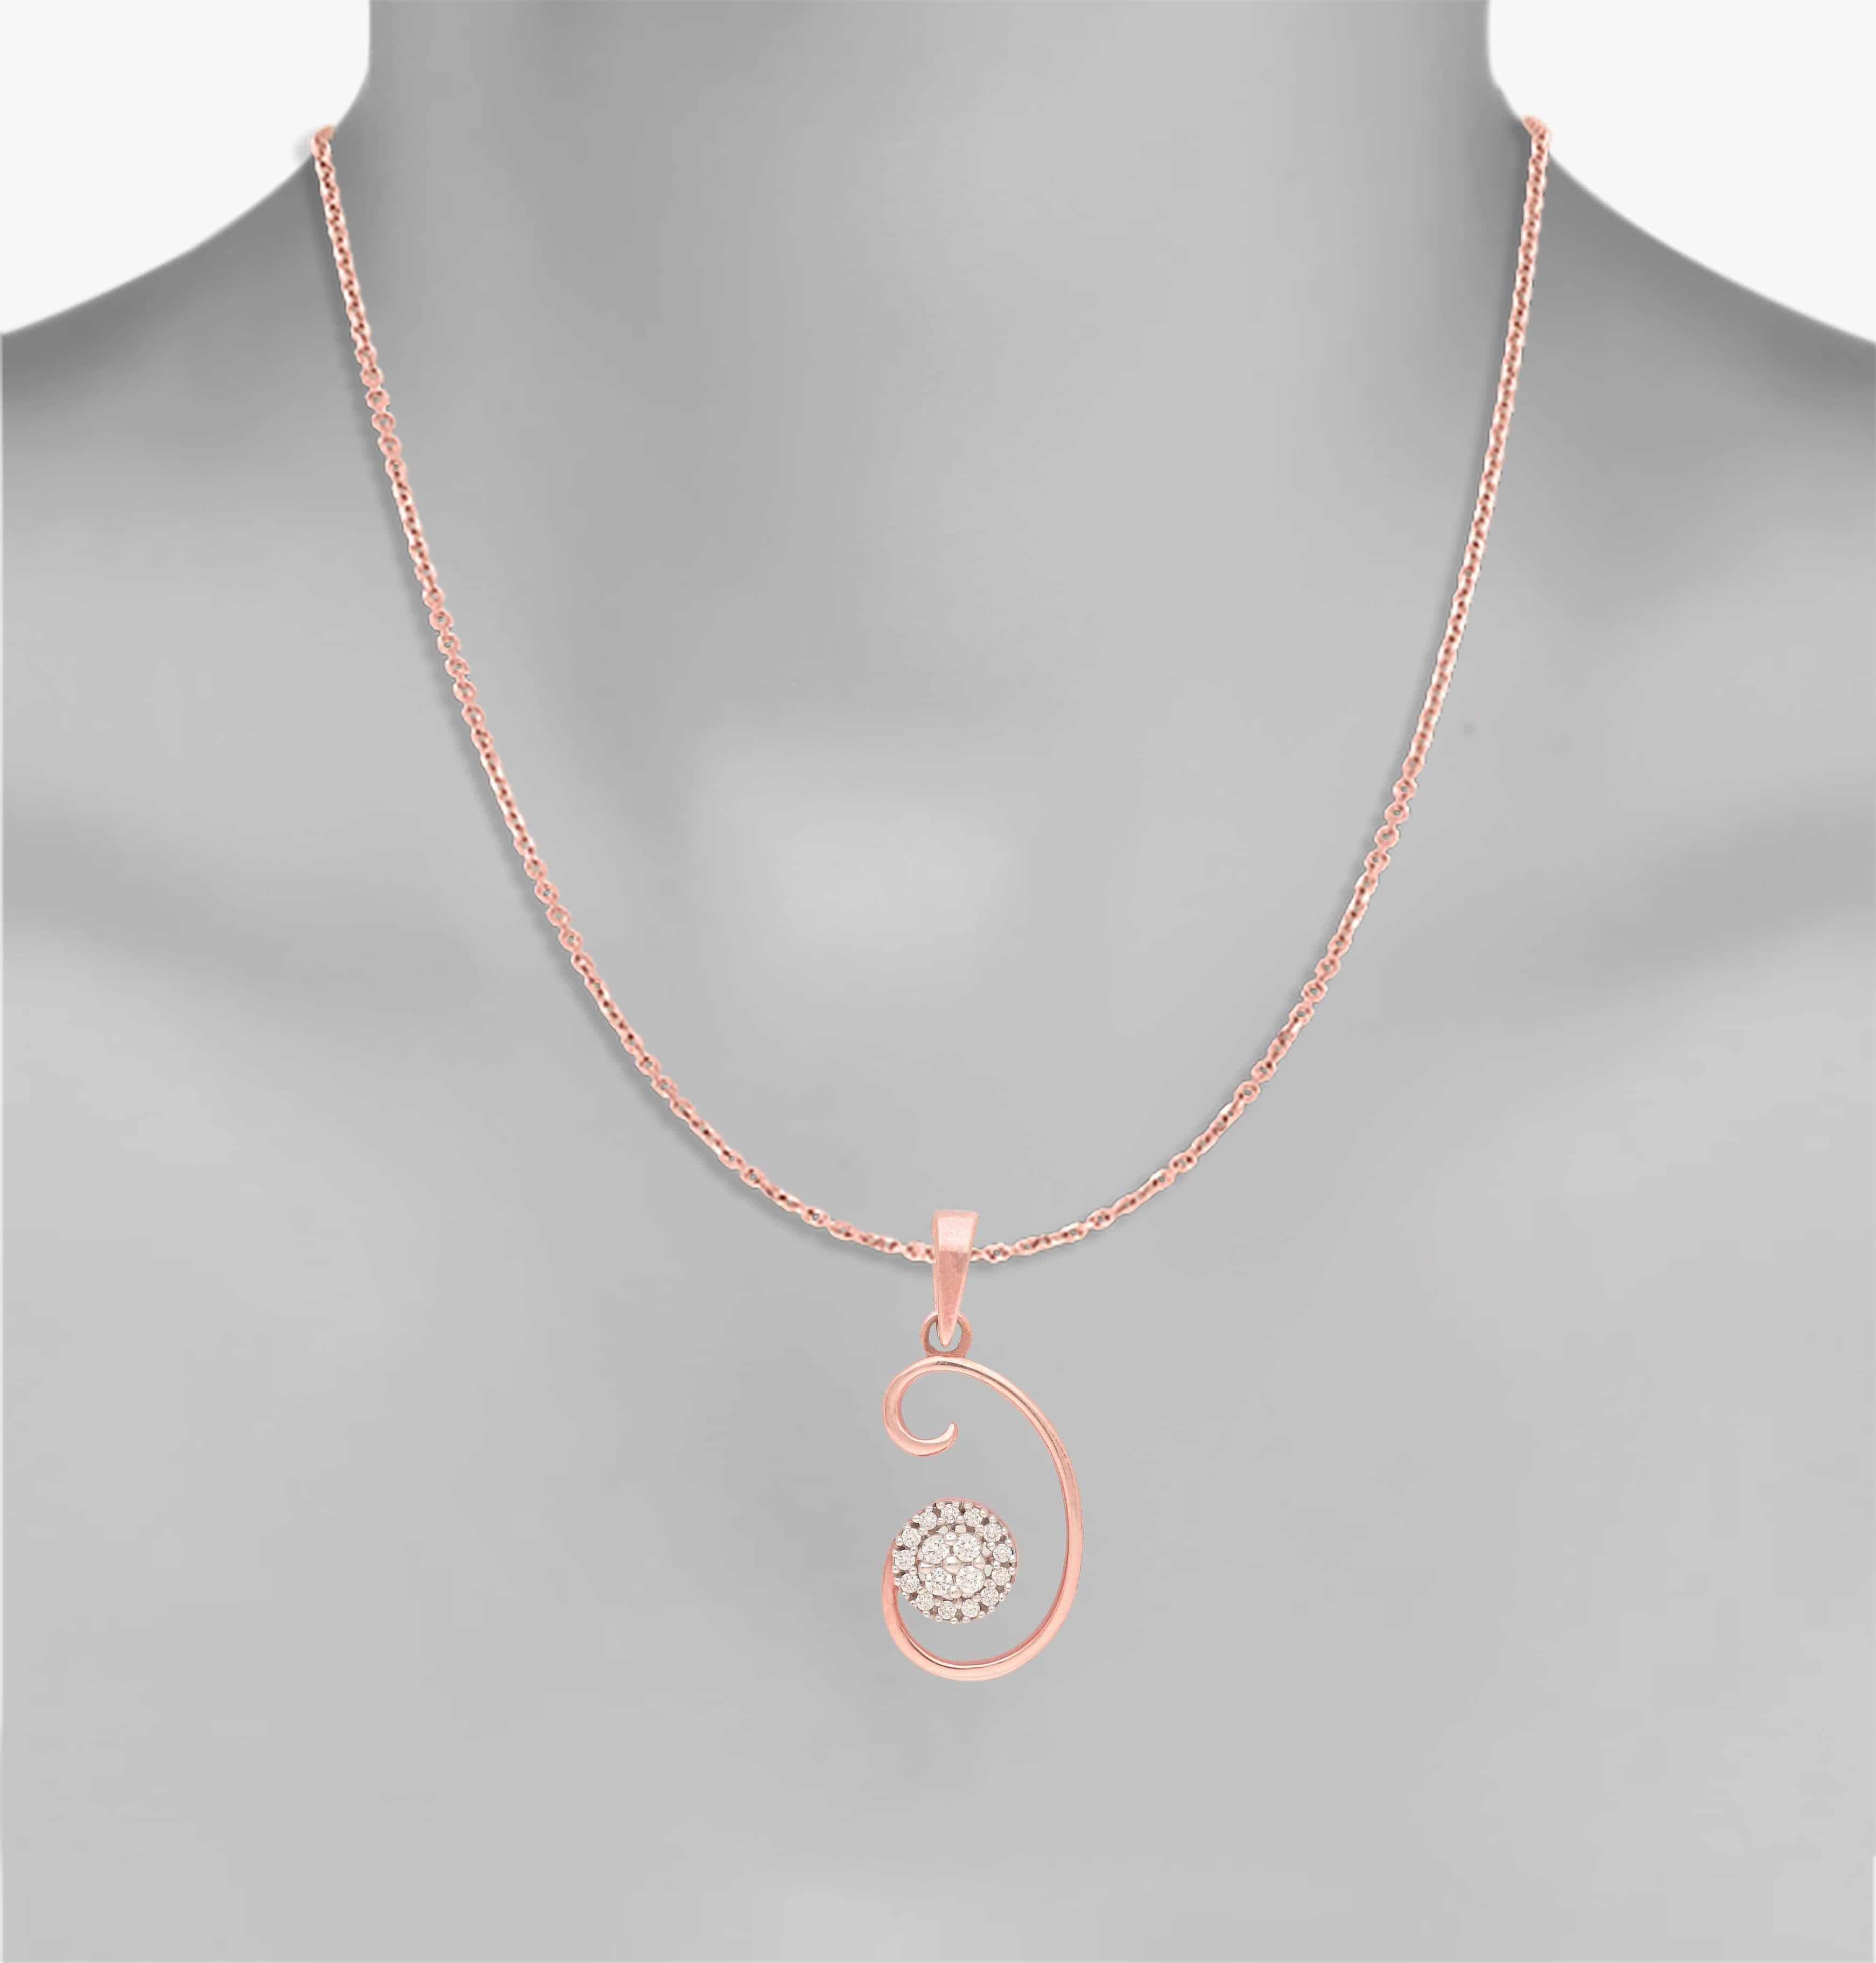 The Groovy Rose Pendant